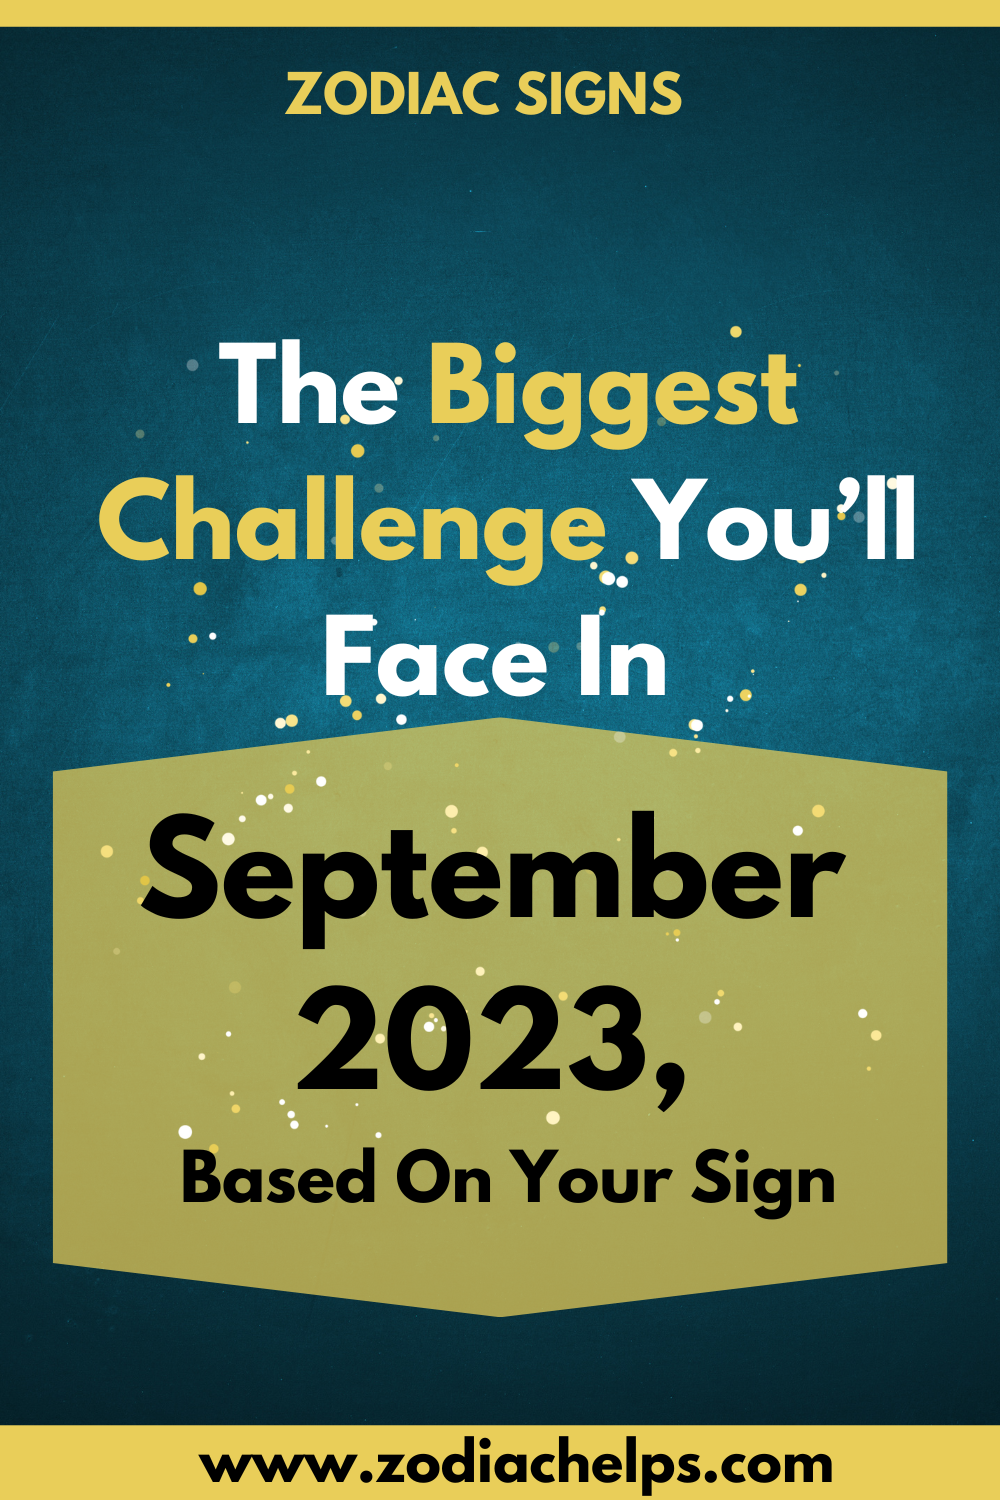 The Biggest Challenge You’ll Face In September 2023, Based On Your Sign